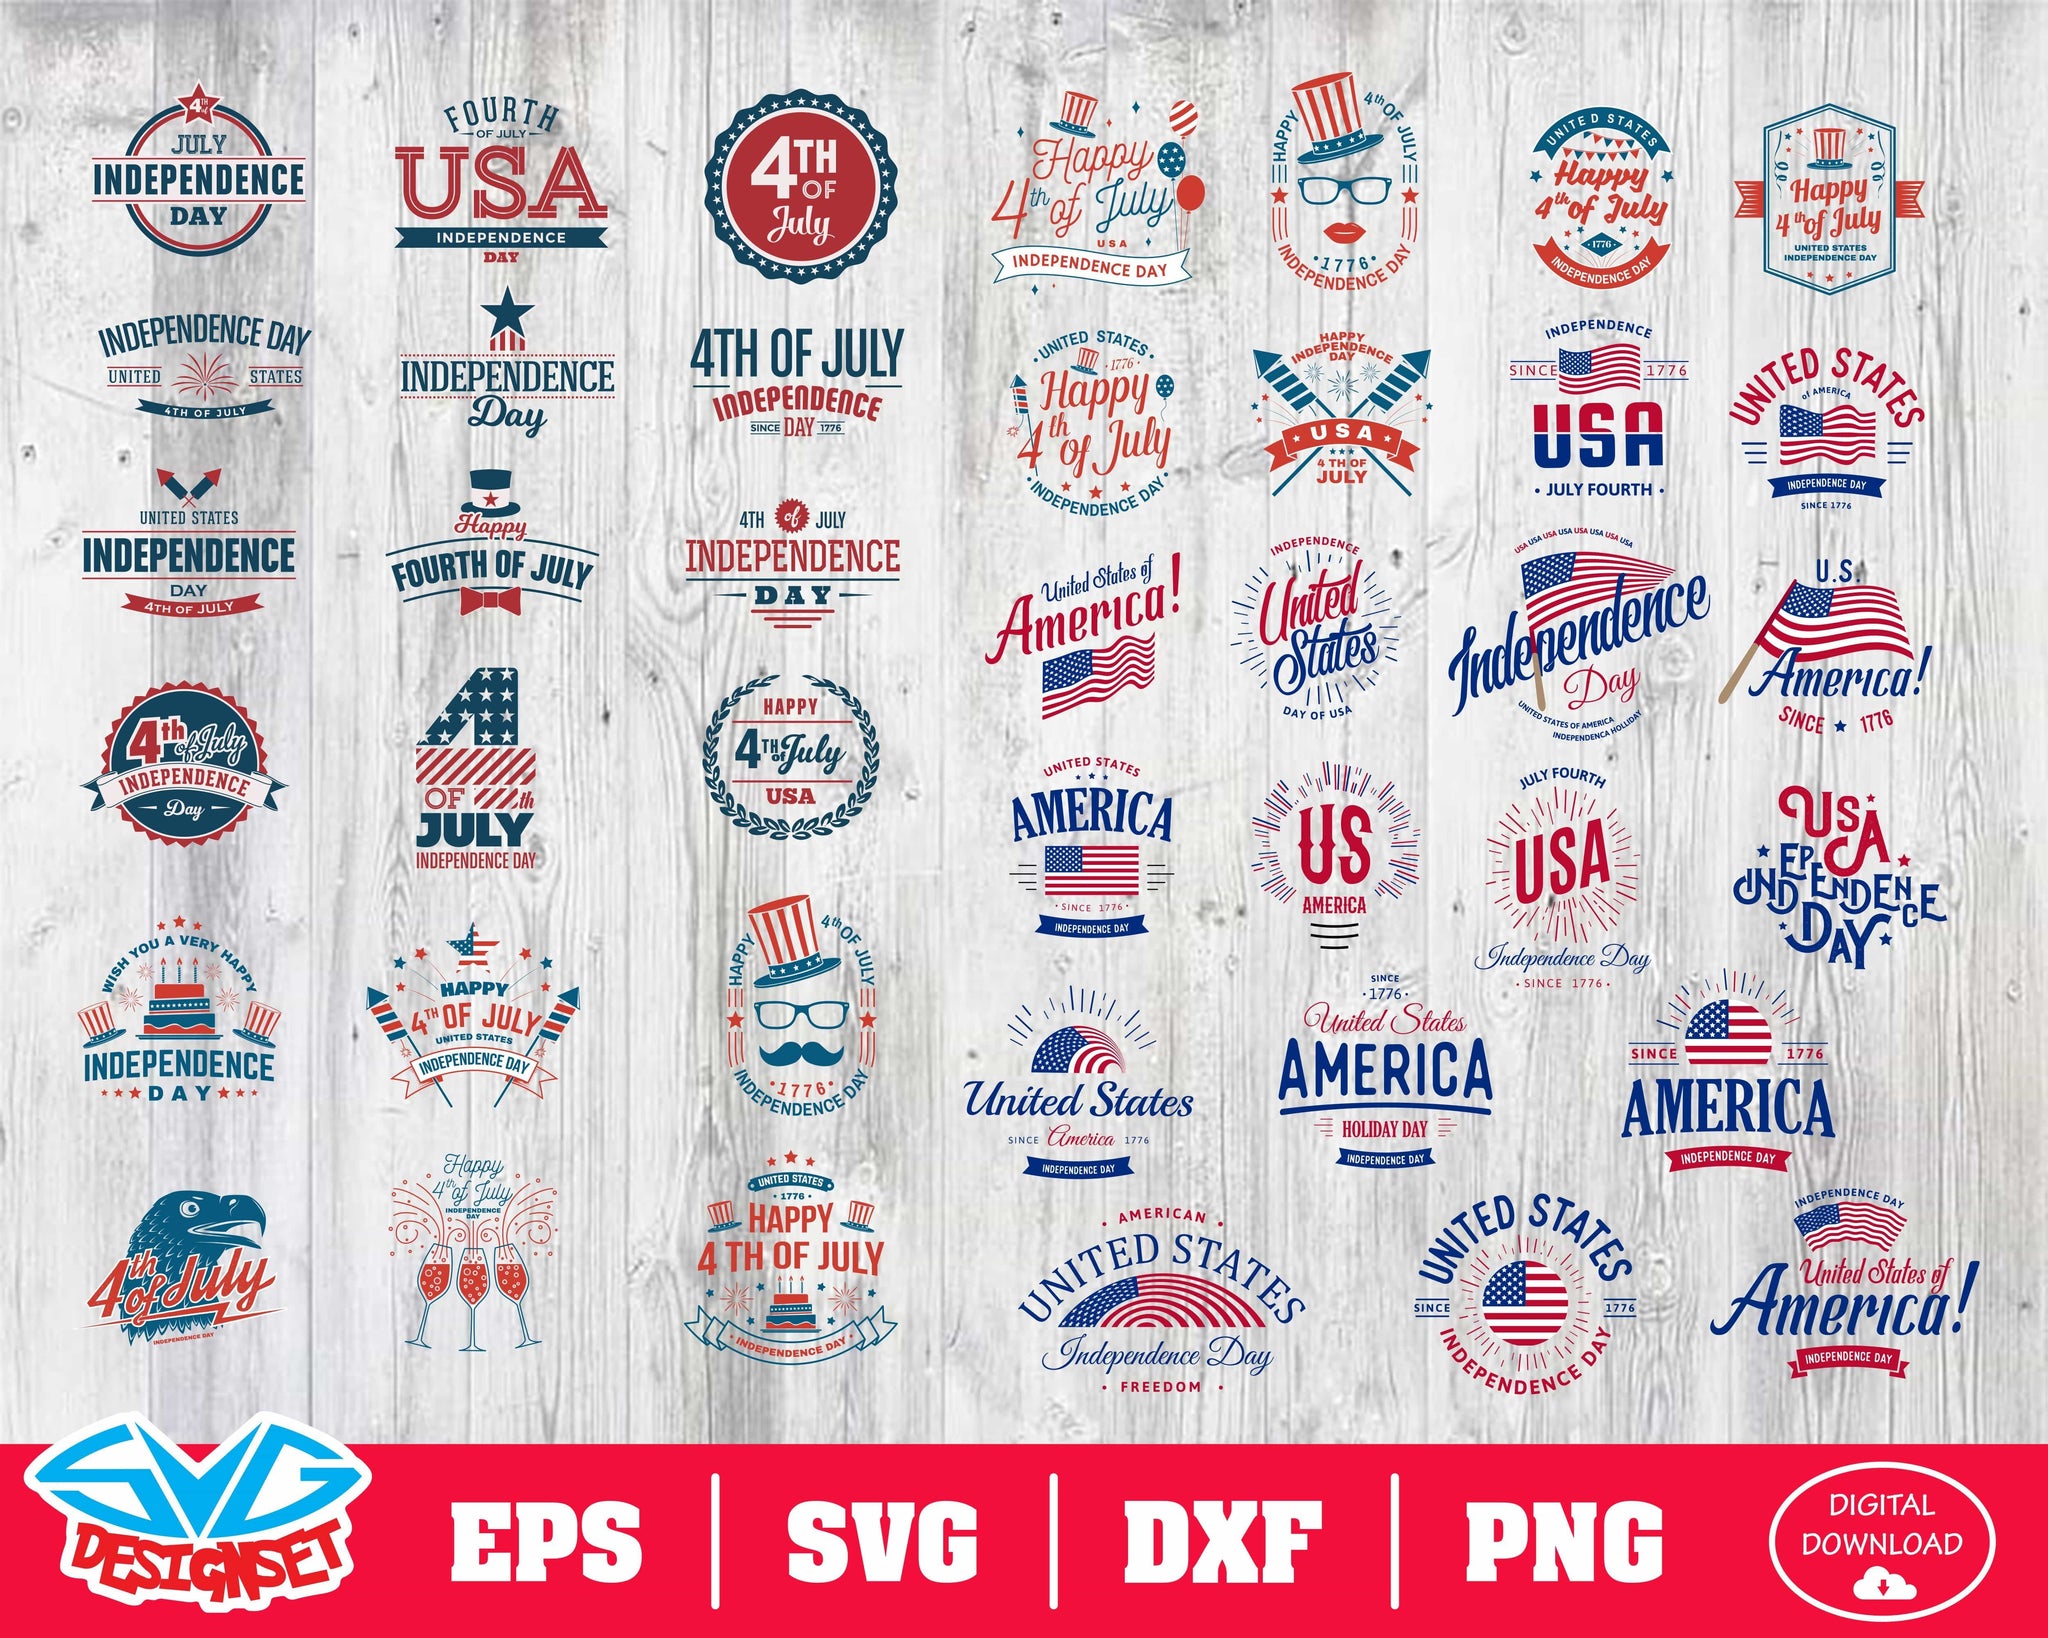 Fourth of July Svg, Dxf, Eps, Png, Clipart, Silhouette and Cutfiles #2 - SVGDesignSets